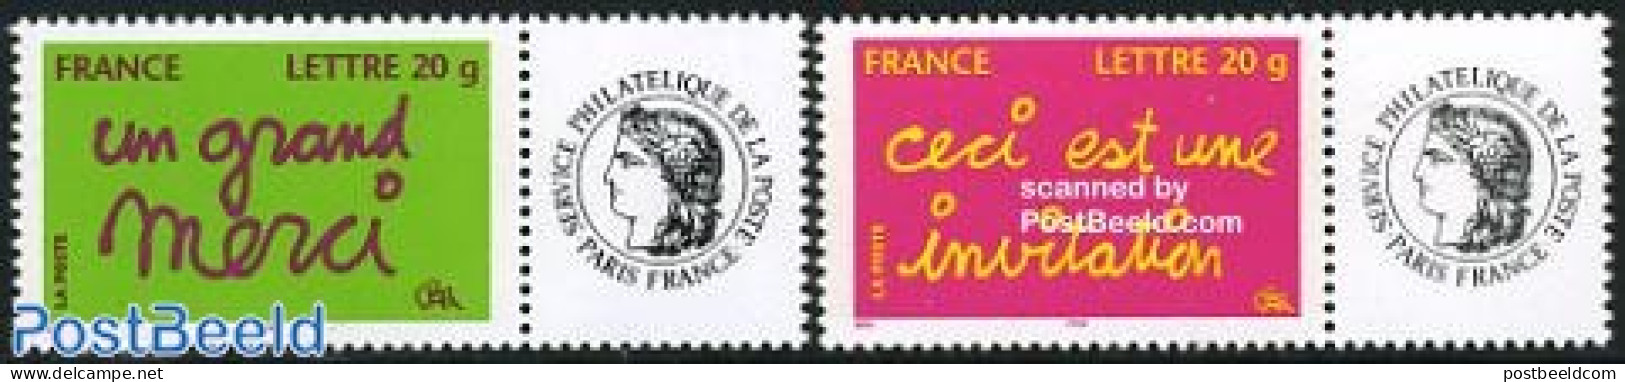 France 2005 Greeting Stamps 2v With Personal Tabs, Mint NH, Various - Greetings & Wishing Stamps - Unused Stamps